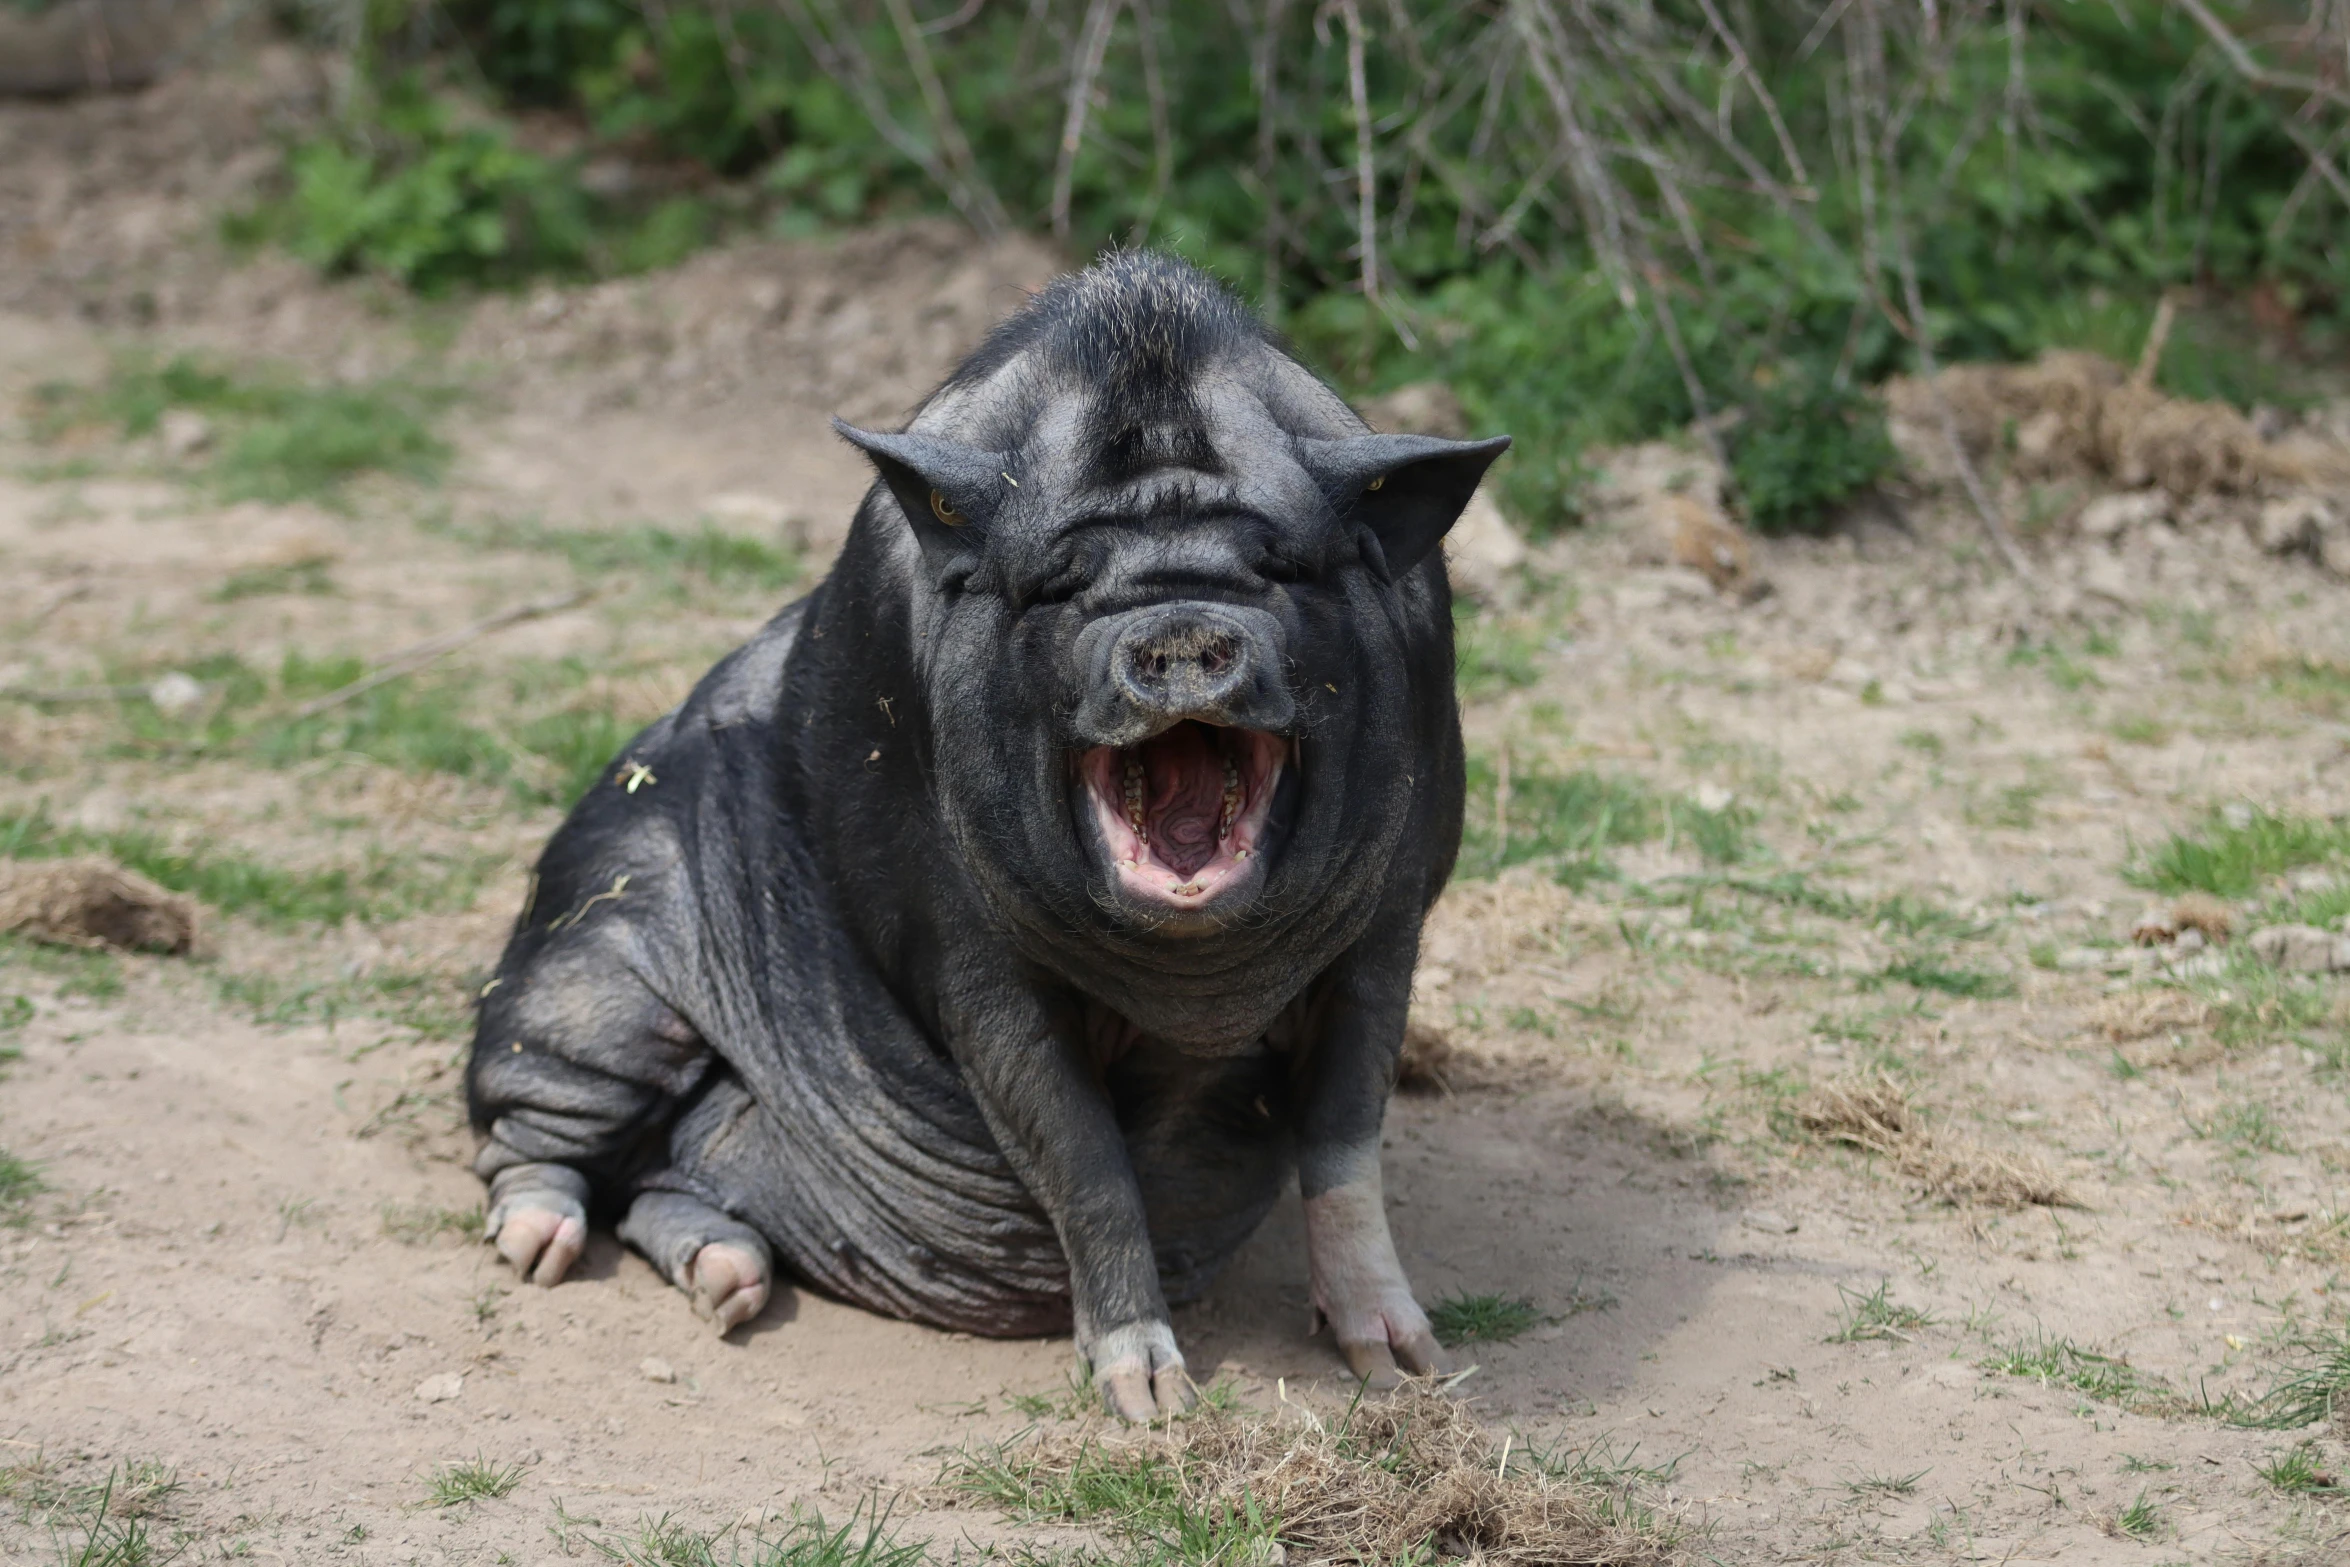 a large black pig sitting on top of a dirt field, pexels contest winner, baroque, with mouth open, loin cloth, grey skinned, waving and smiling